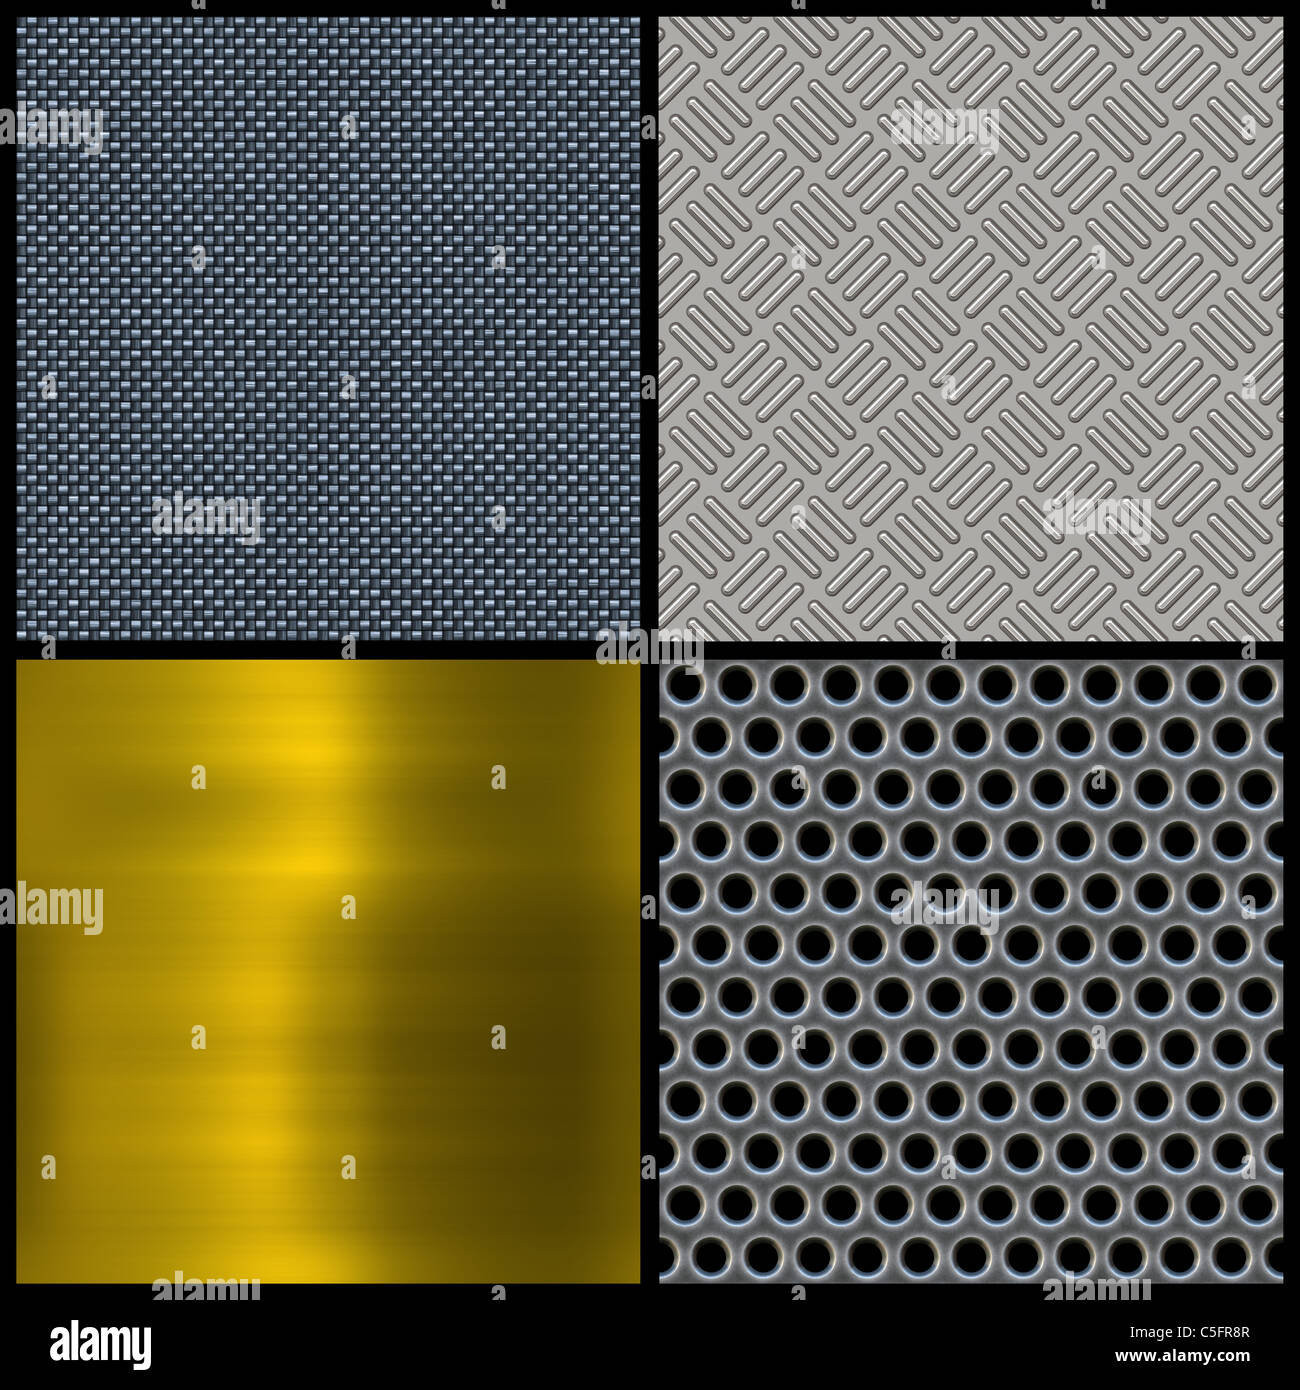 A variety of background textures. Carbon fiber, metal mesh grate material,  diamond plate steel, and shiny gold plating Stock Photo - Alamy